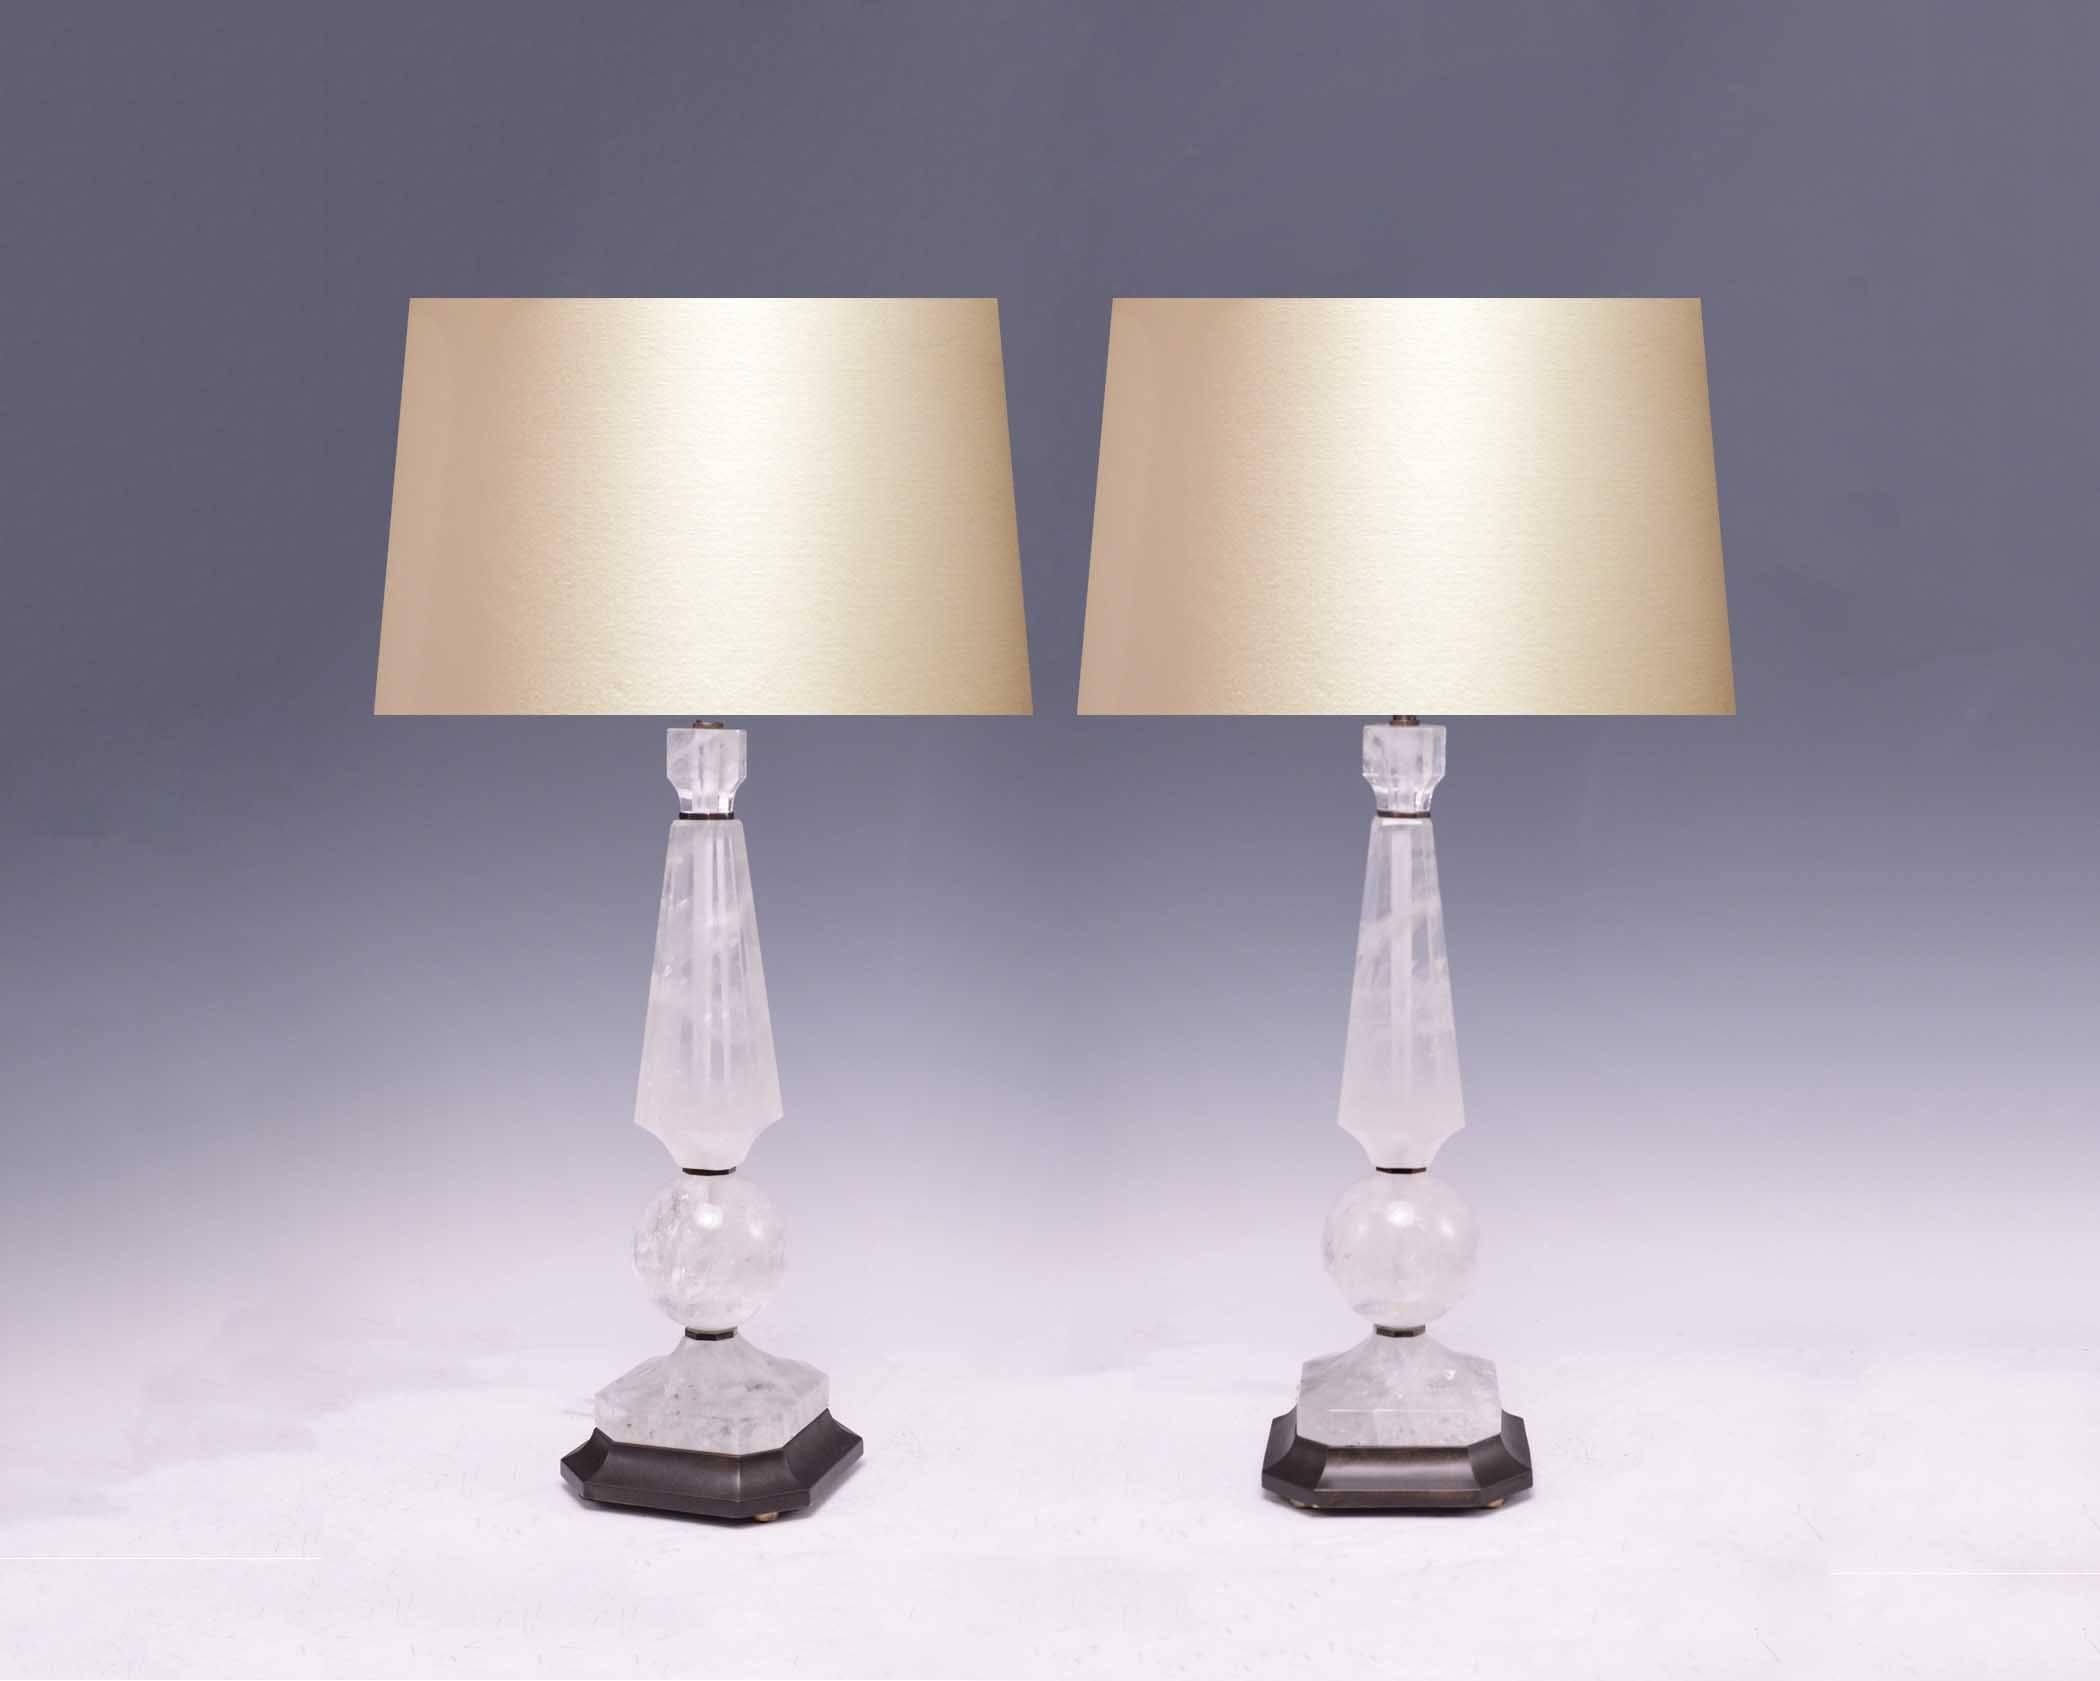 Elegant form rock crystal lamps with antique brass finish bases, created by Phoenix Gallery, NYC.
To the rock crystal: 20.5 in/H
Overall: 33.5 in/H
Lamp shade not included.
